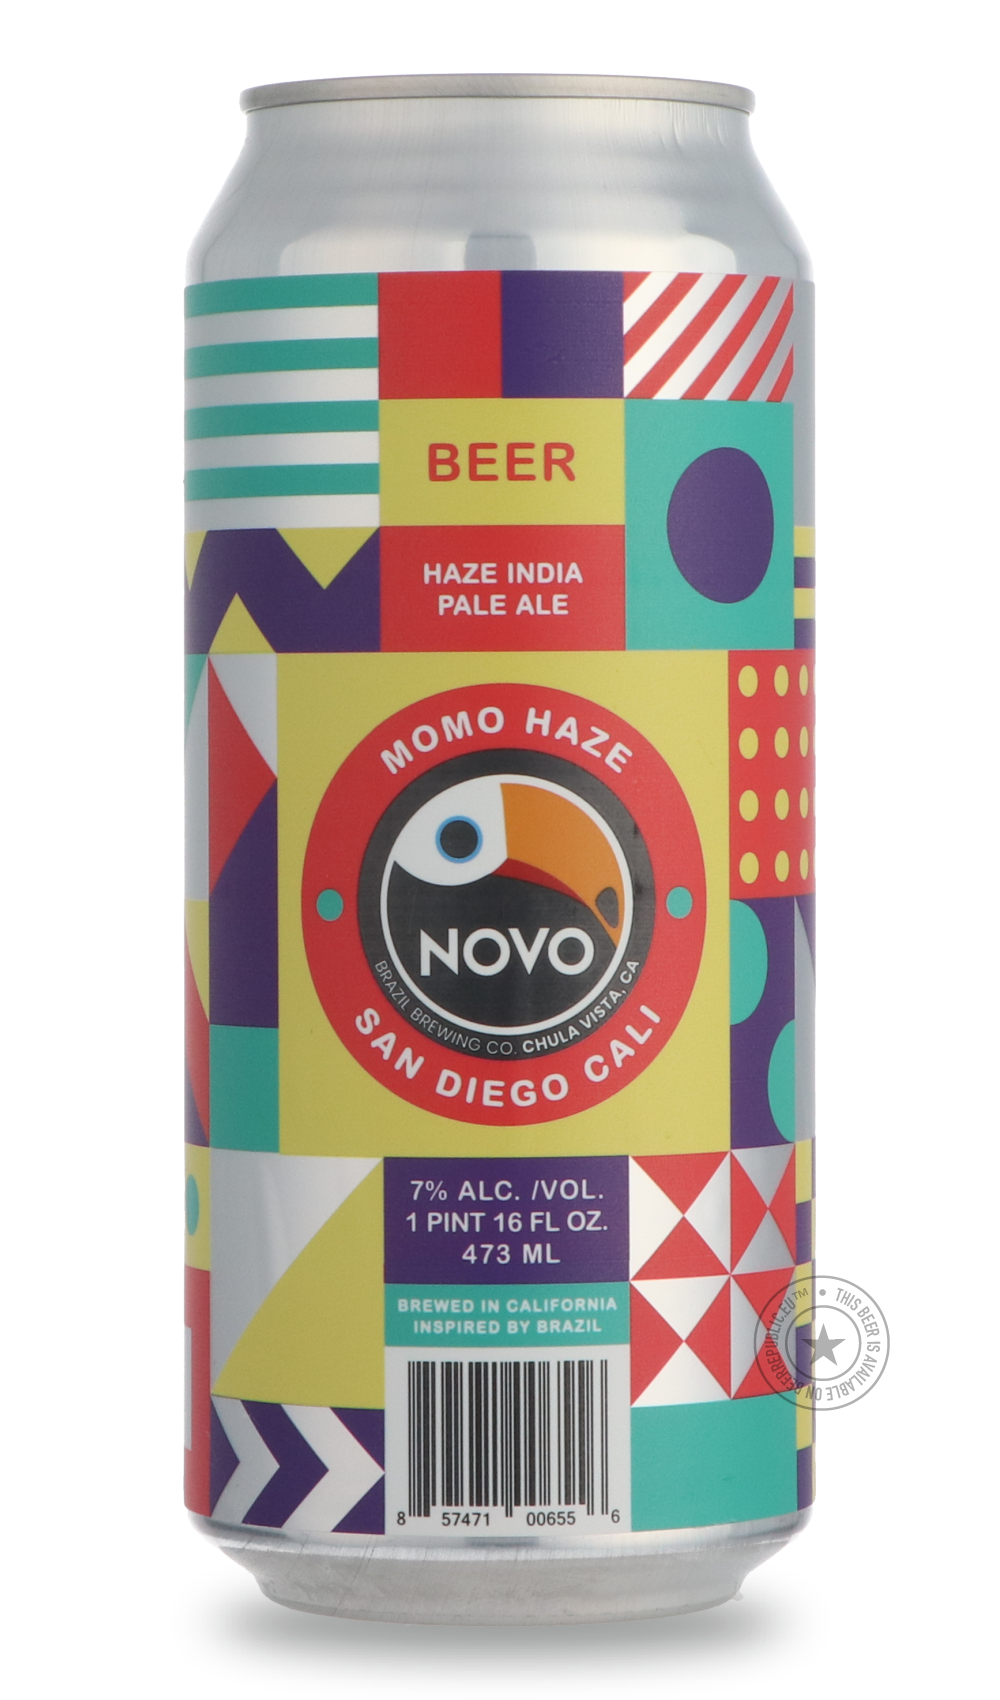 -Novo Brazil- Momo Haze-IPA- Only @ Beer Republic - The best online beer store for American & Canadian craft beer - Buy beer online from the USA and Canada - Bier online kopen - Amerikaans bier kopen - Craft beer store - Craft beer kopen - Amerikanisch bier kaufen - Bier online kaufen - Acheter biere online - IPA - Stout - Porter - New England IPA - Hazy IPA - Imperial Stout - Barrel Aged - Barrel Aged Imperial Stout - Brown - Dark beer - Blond - Blonde - Pilsner - Lager - Wheat - Weizen - Amber - Barley Wi